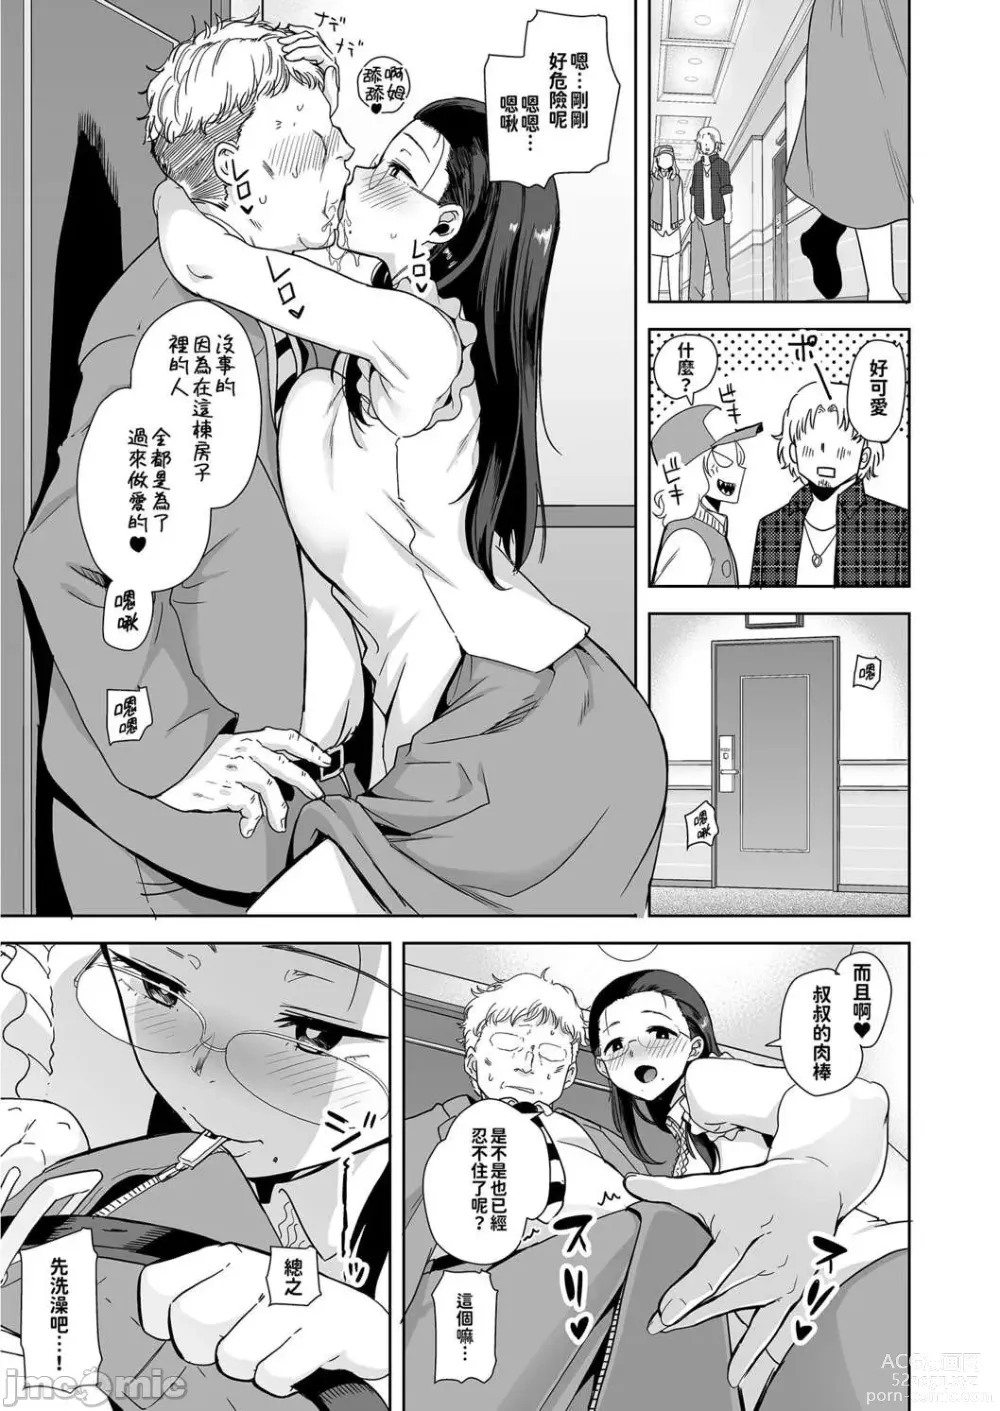 Page 7 of doujinshi 聖華女学院高等部公認竿おじさん 1